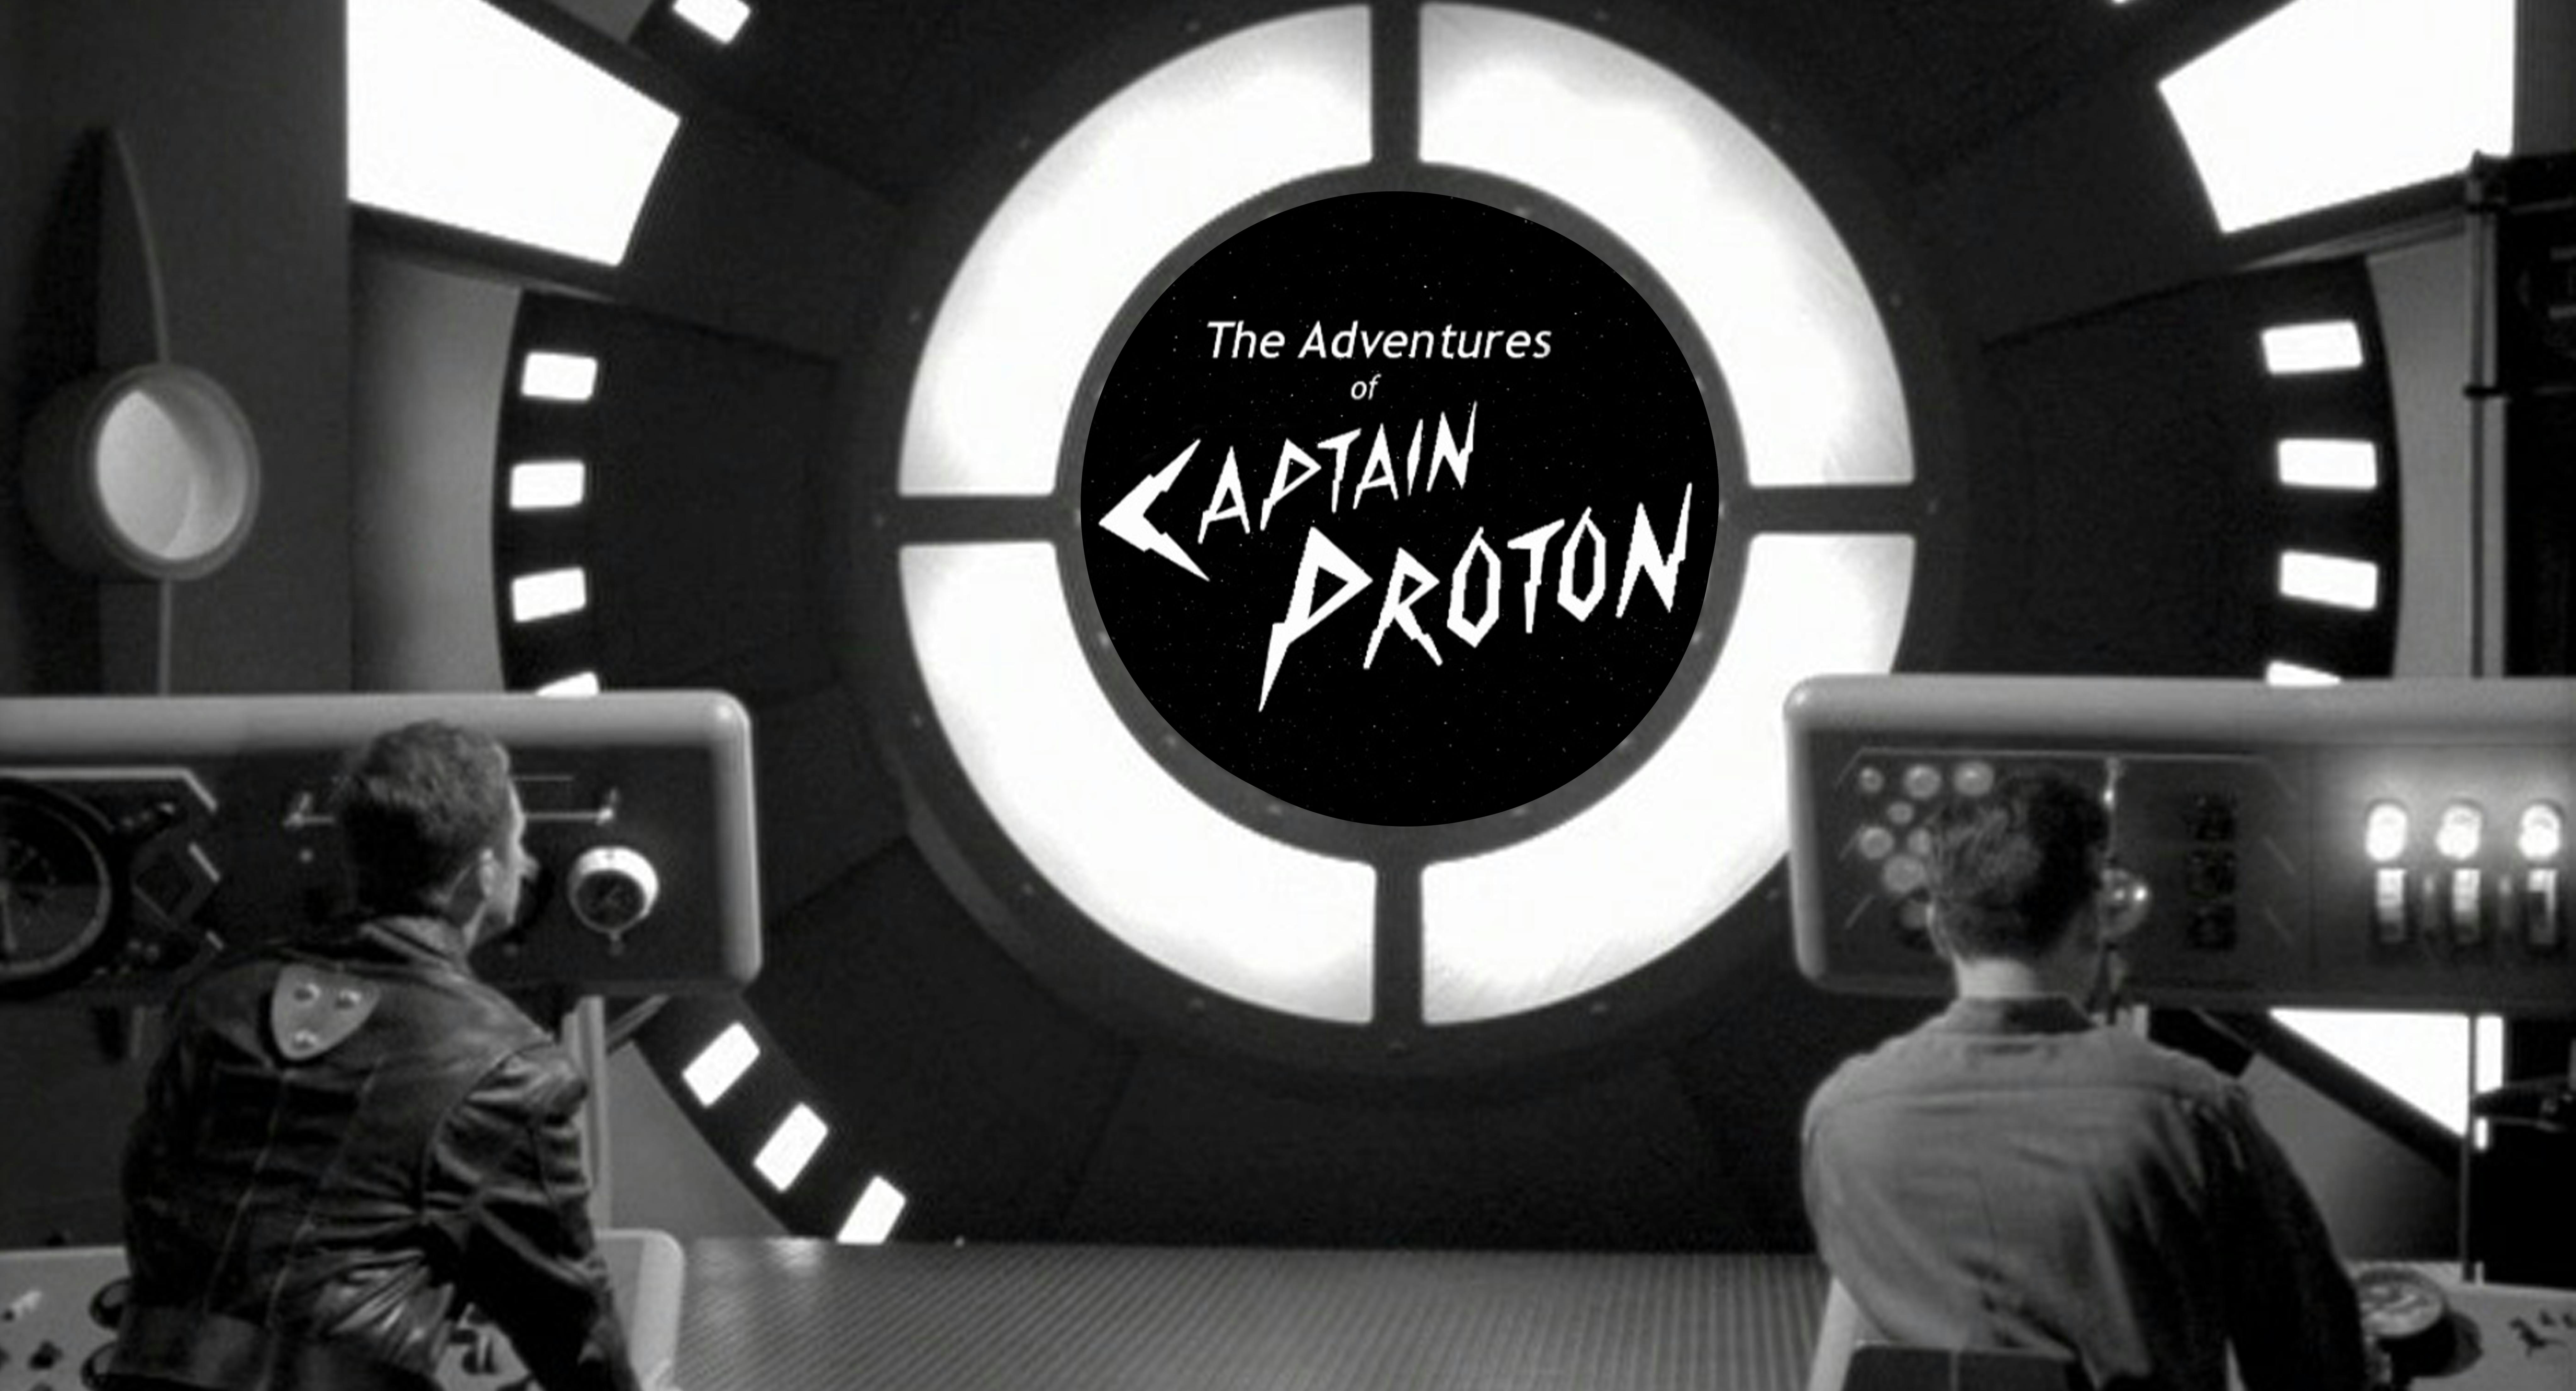 Star Trek History: Bride of Chaotica! thumbnail where in the holodeck, at their stations, Tom Paris and Harry Kim look up towards the viewscreen and see the logo 'The Adventures of Captain Proton'